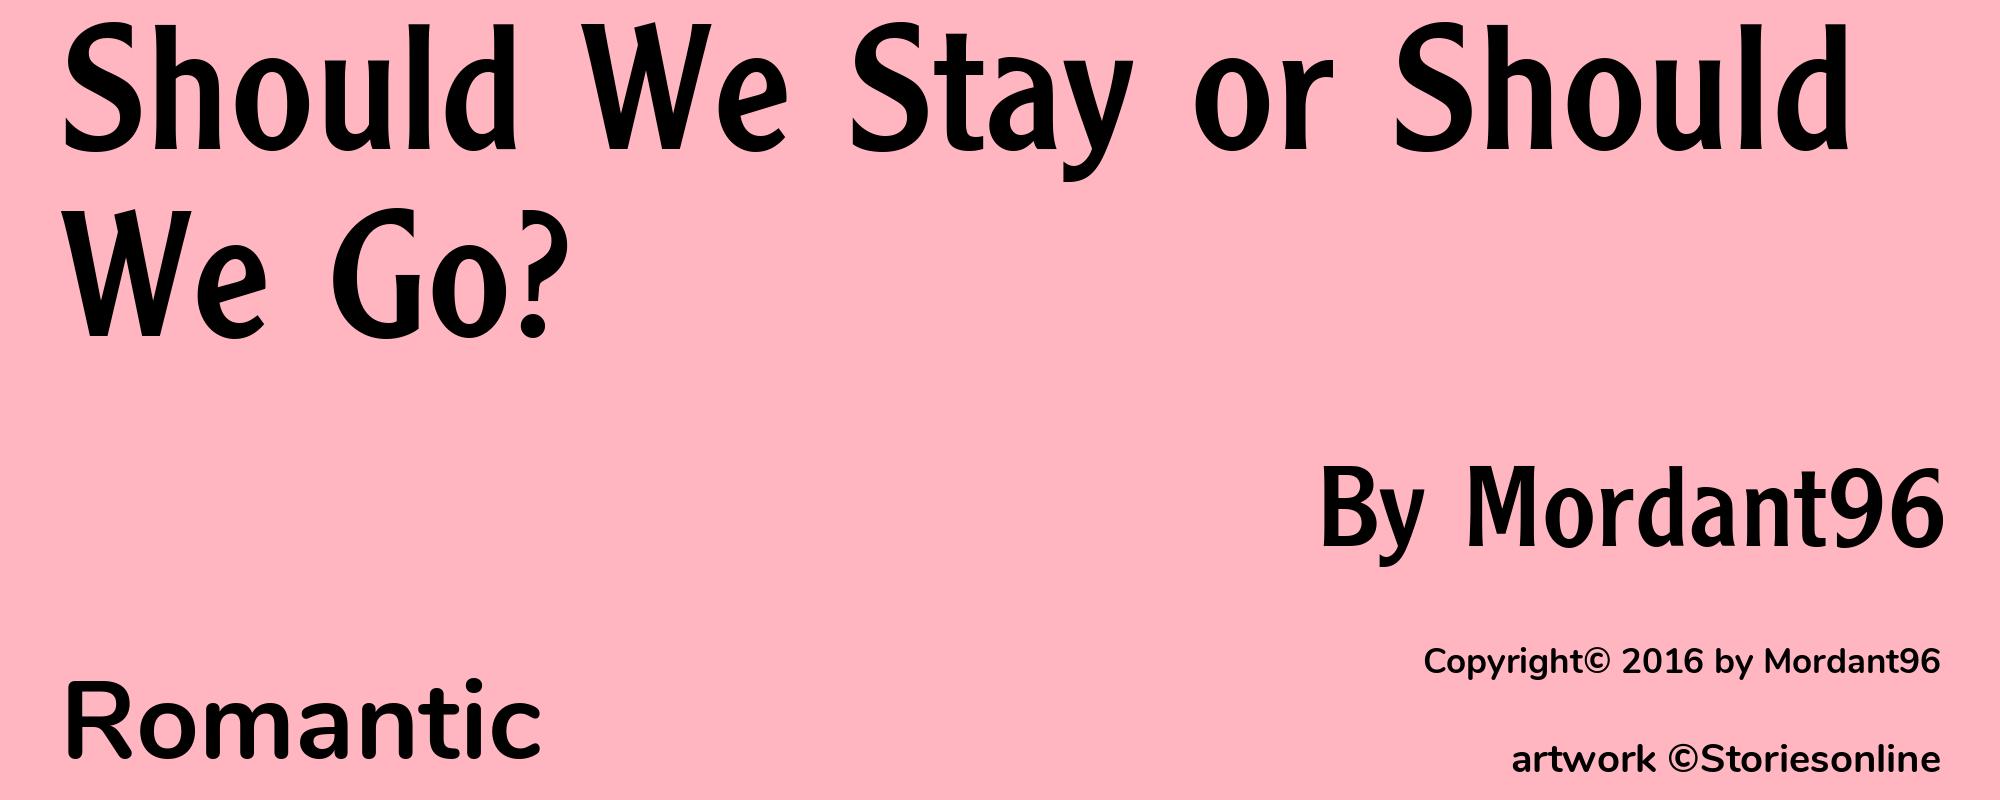 Should We Stay or Should We Go? - Cover